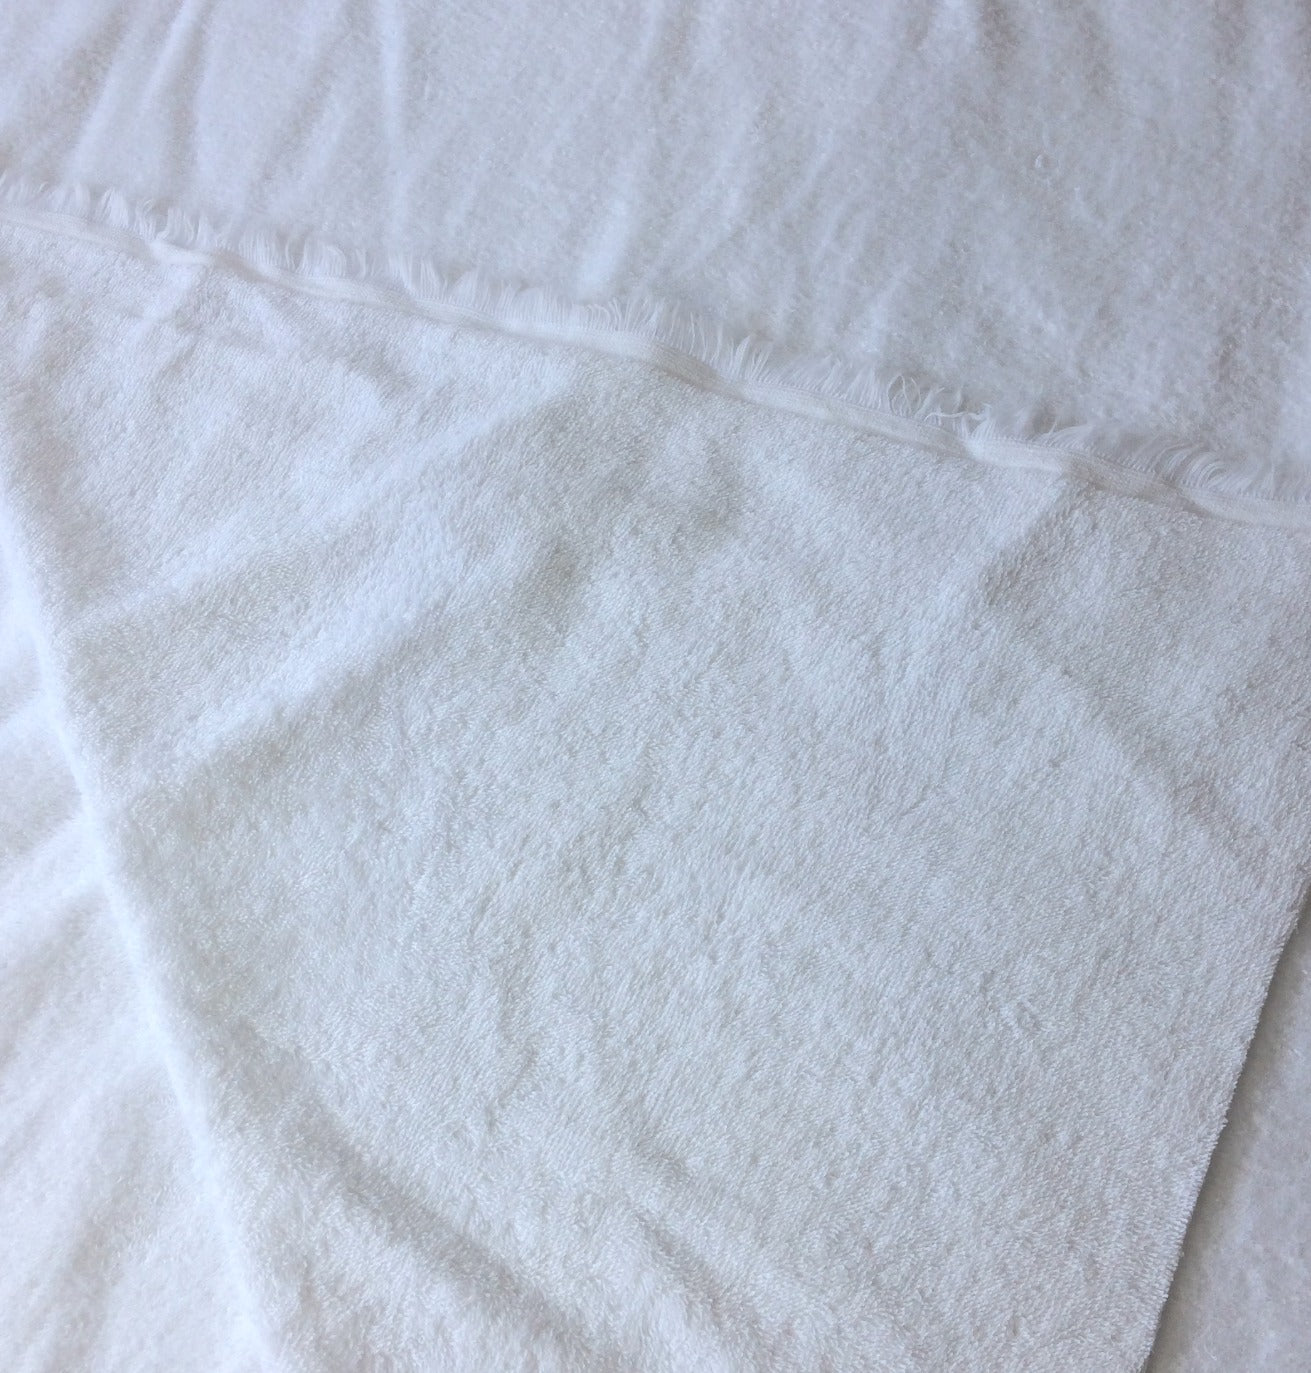 Brilliant white terry toweling fabric, 100% cotton double sided